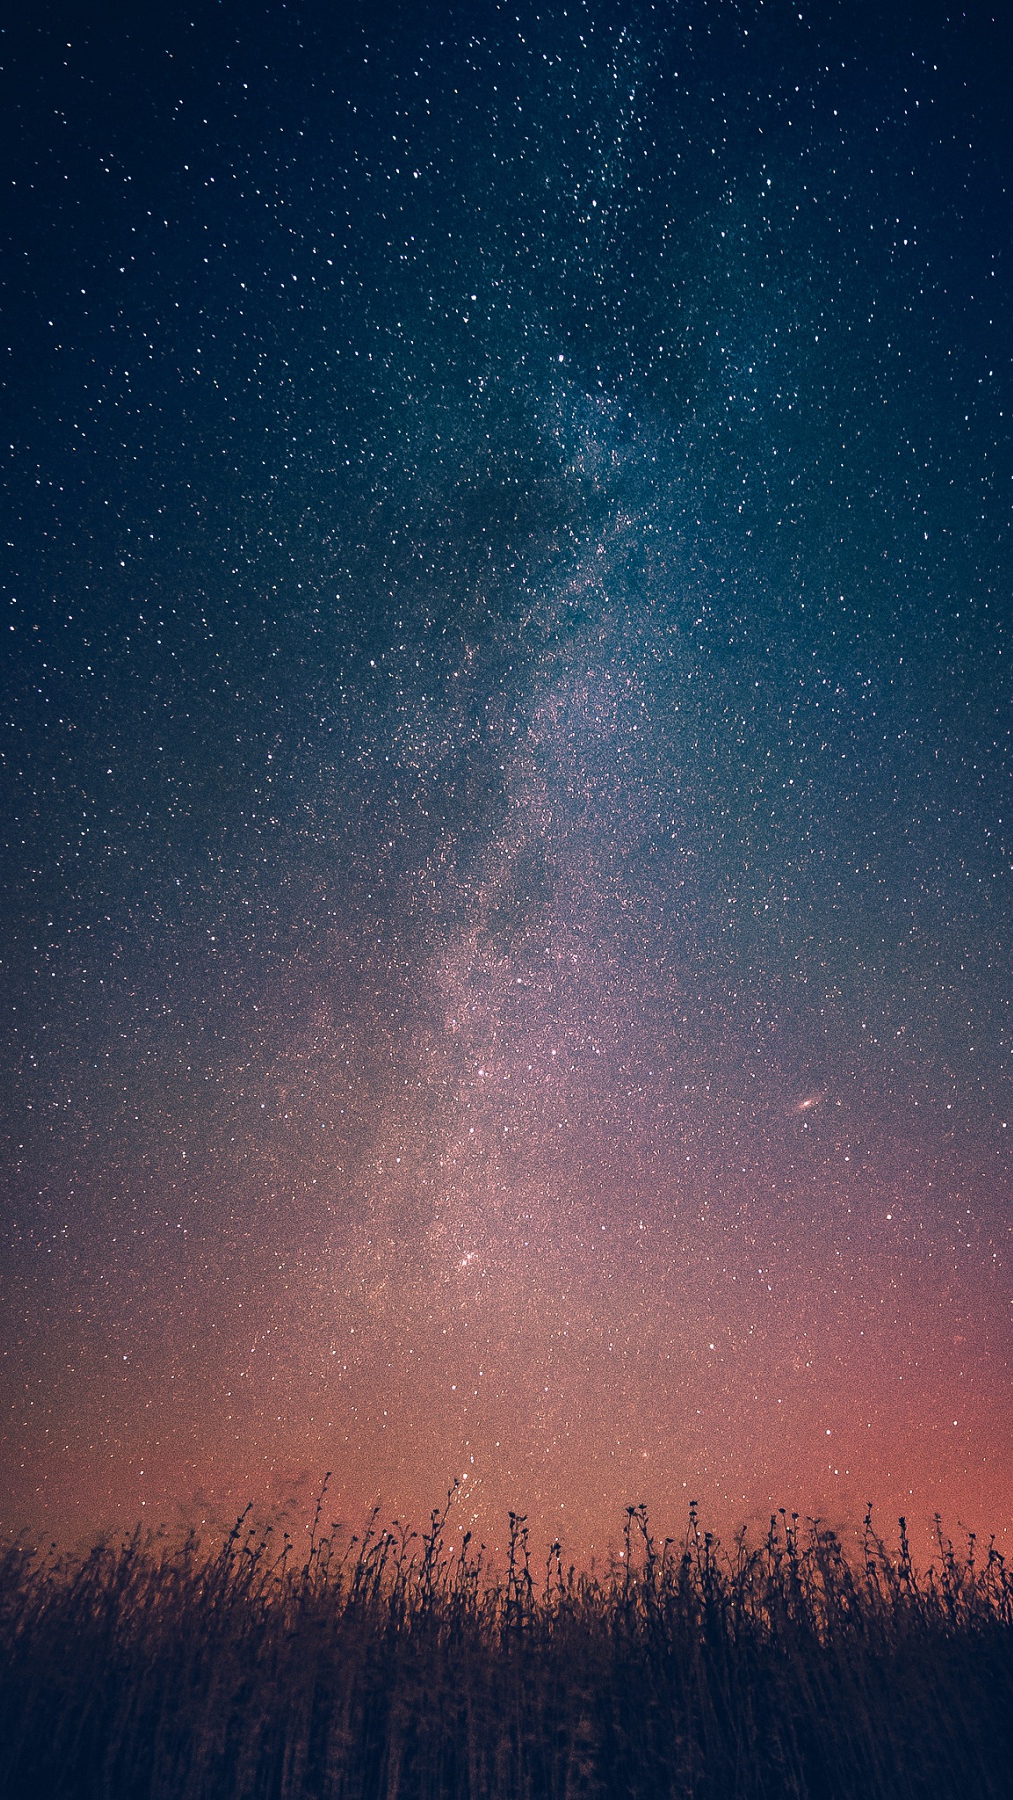 Milky Way Galaxy From Earth Infinite Stars iPhone Wallpaper iphoneswallpapers com